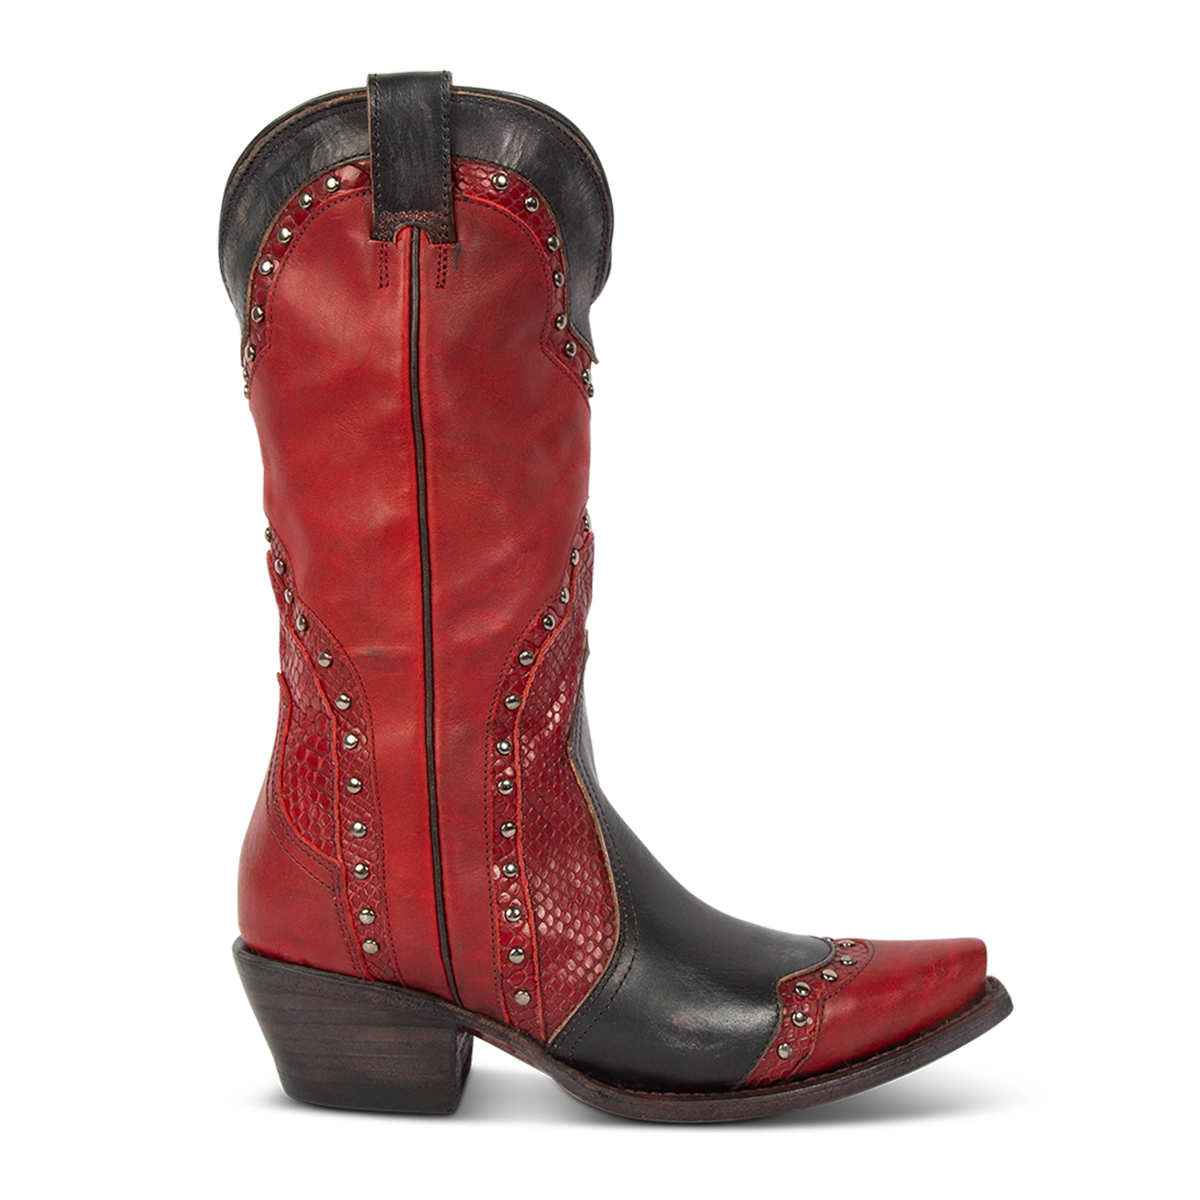 FREEBIRD women's Warner red multi leather western cowboy boot with embossed detailing and snip toe construction